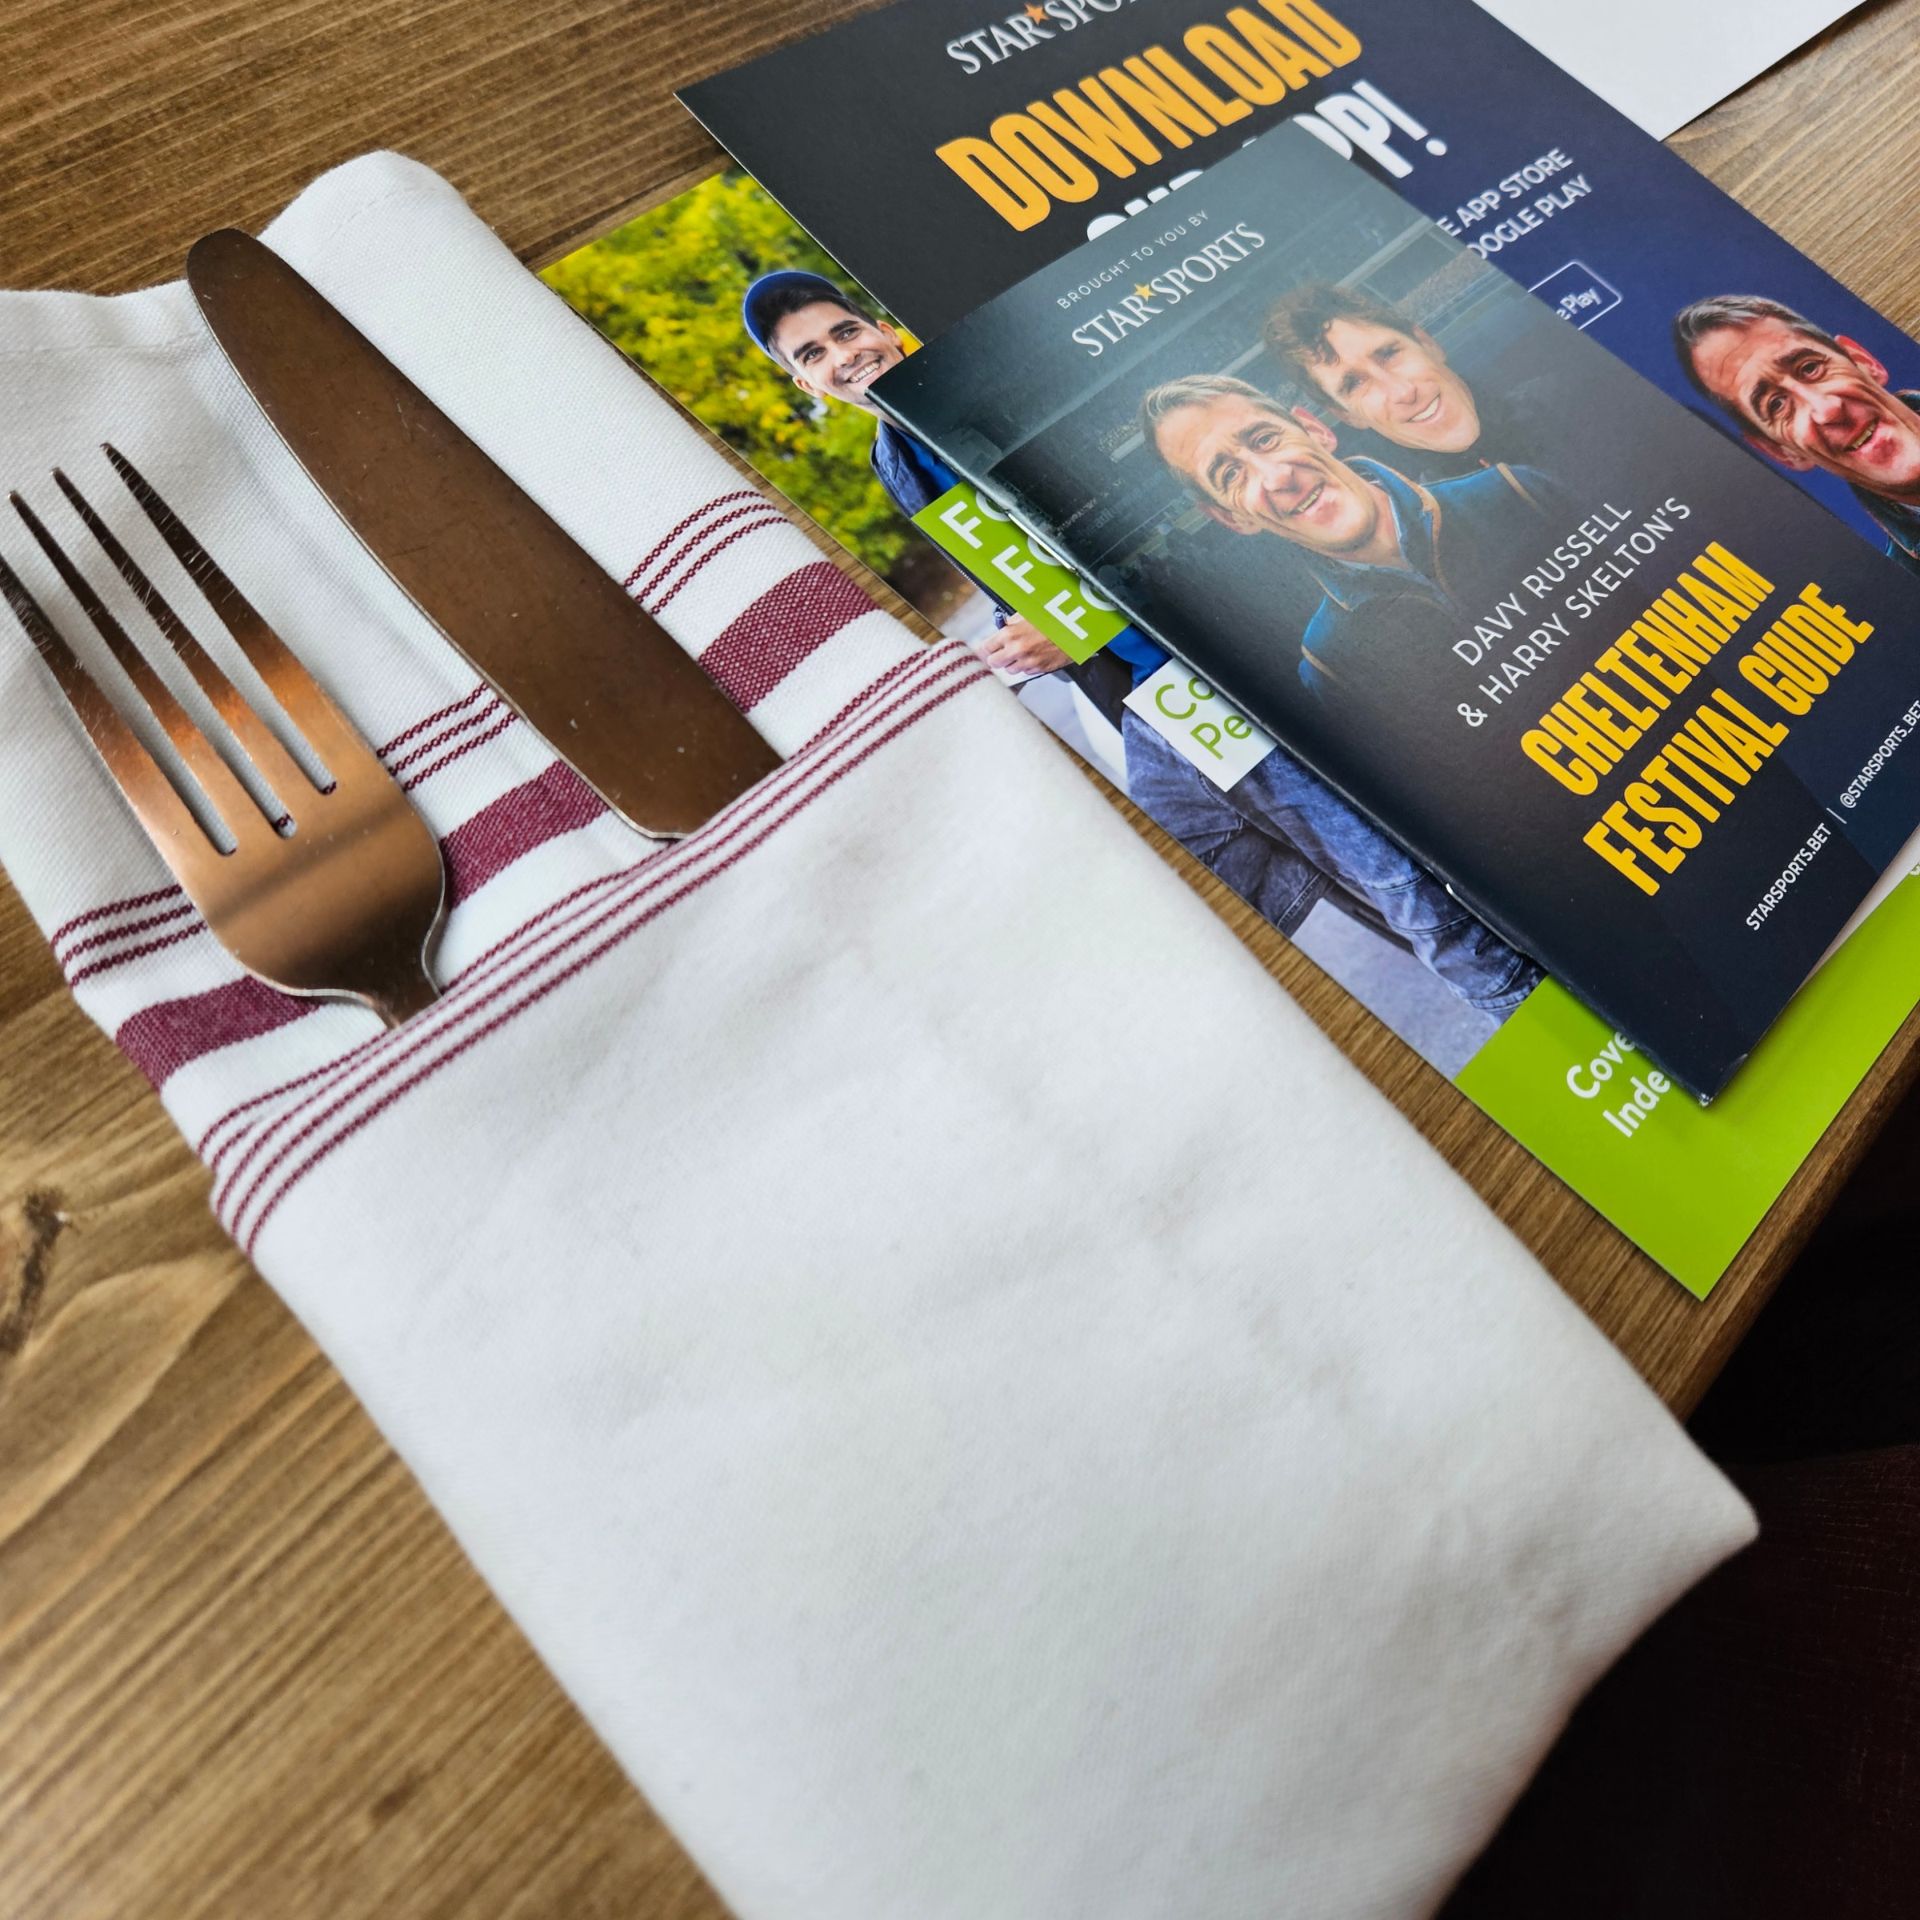 Cutlery and leaflet for an event